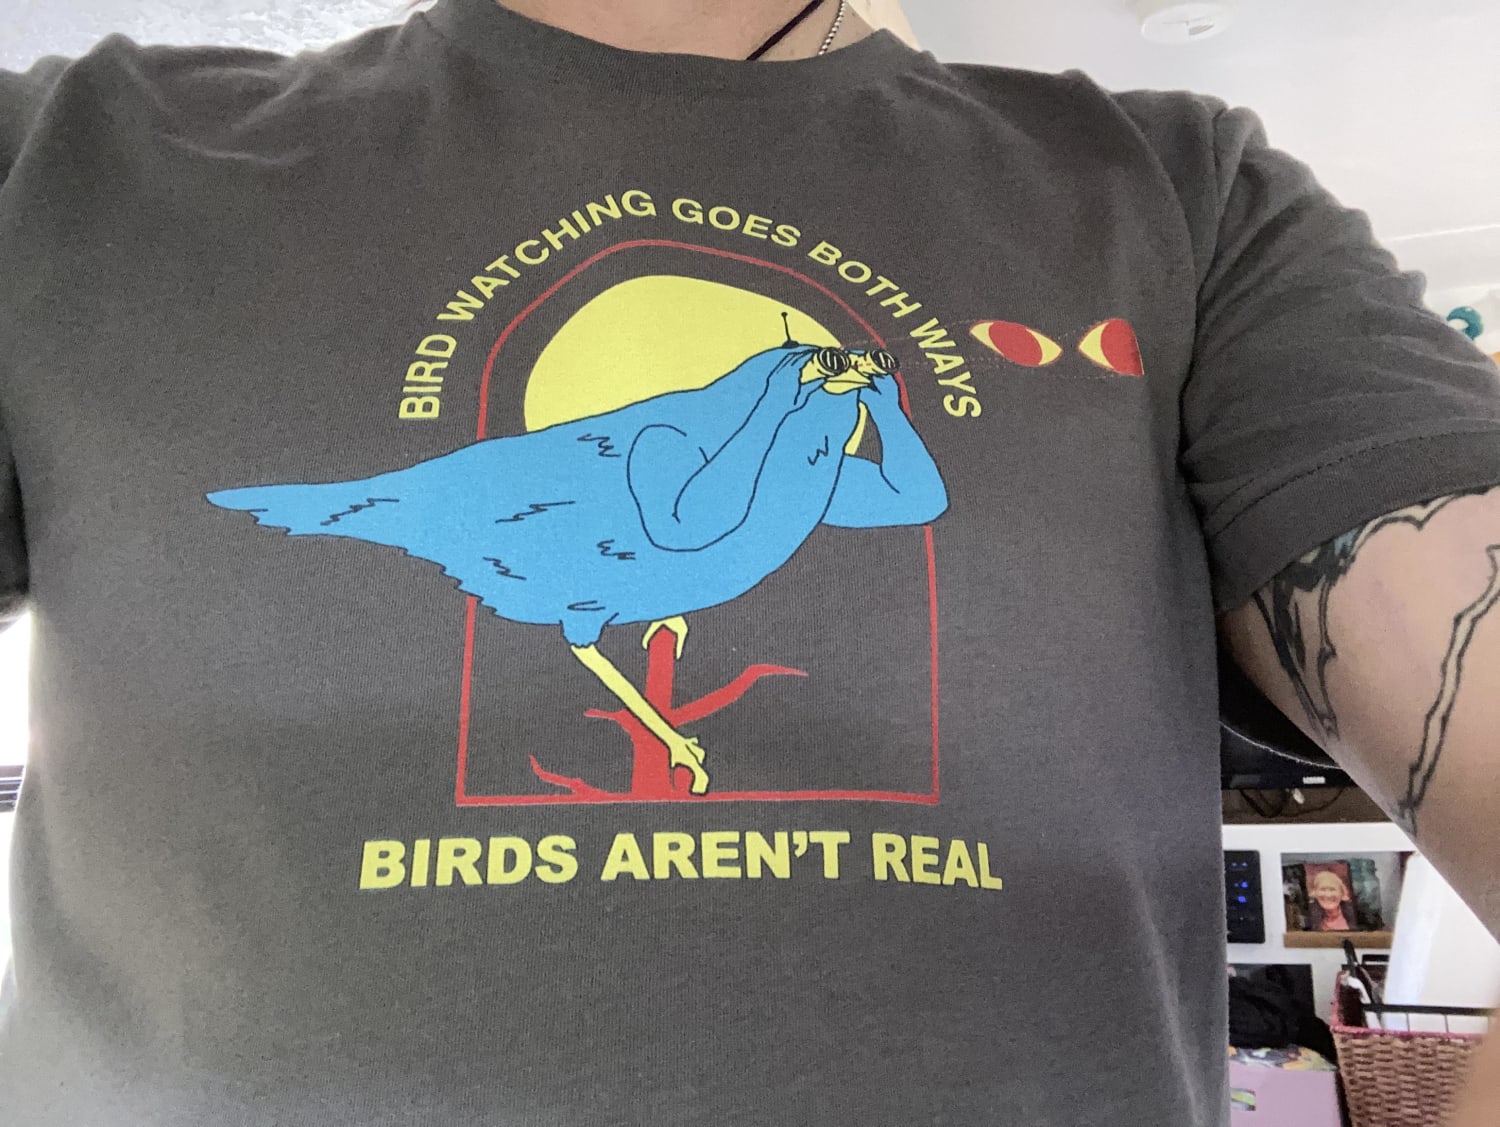 New shirt spits facts.